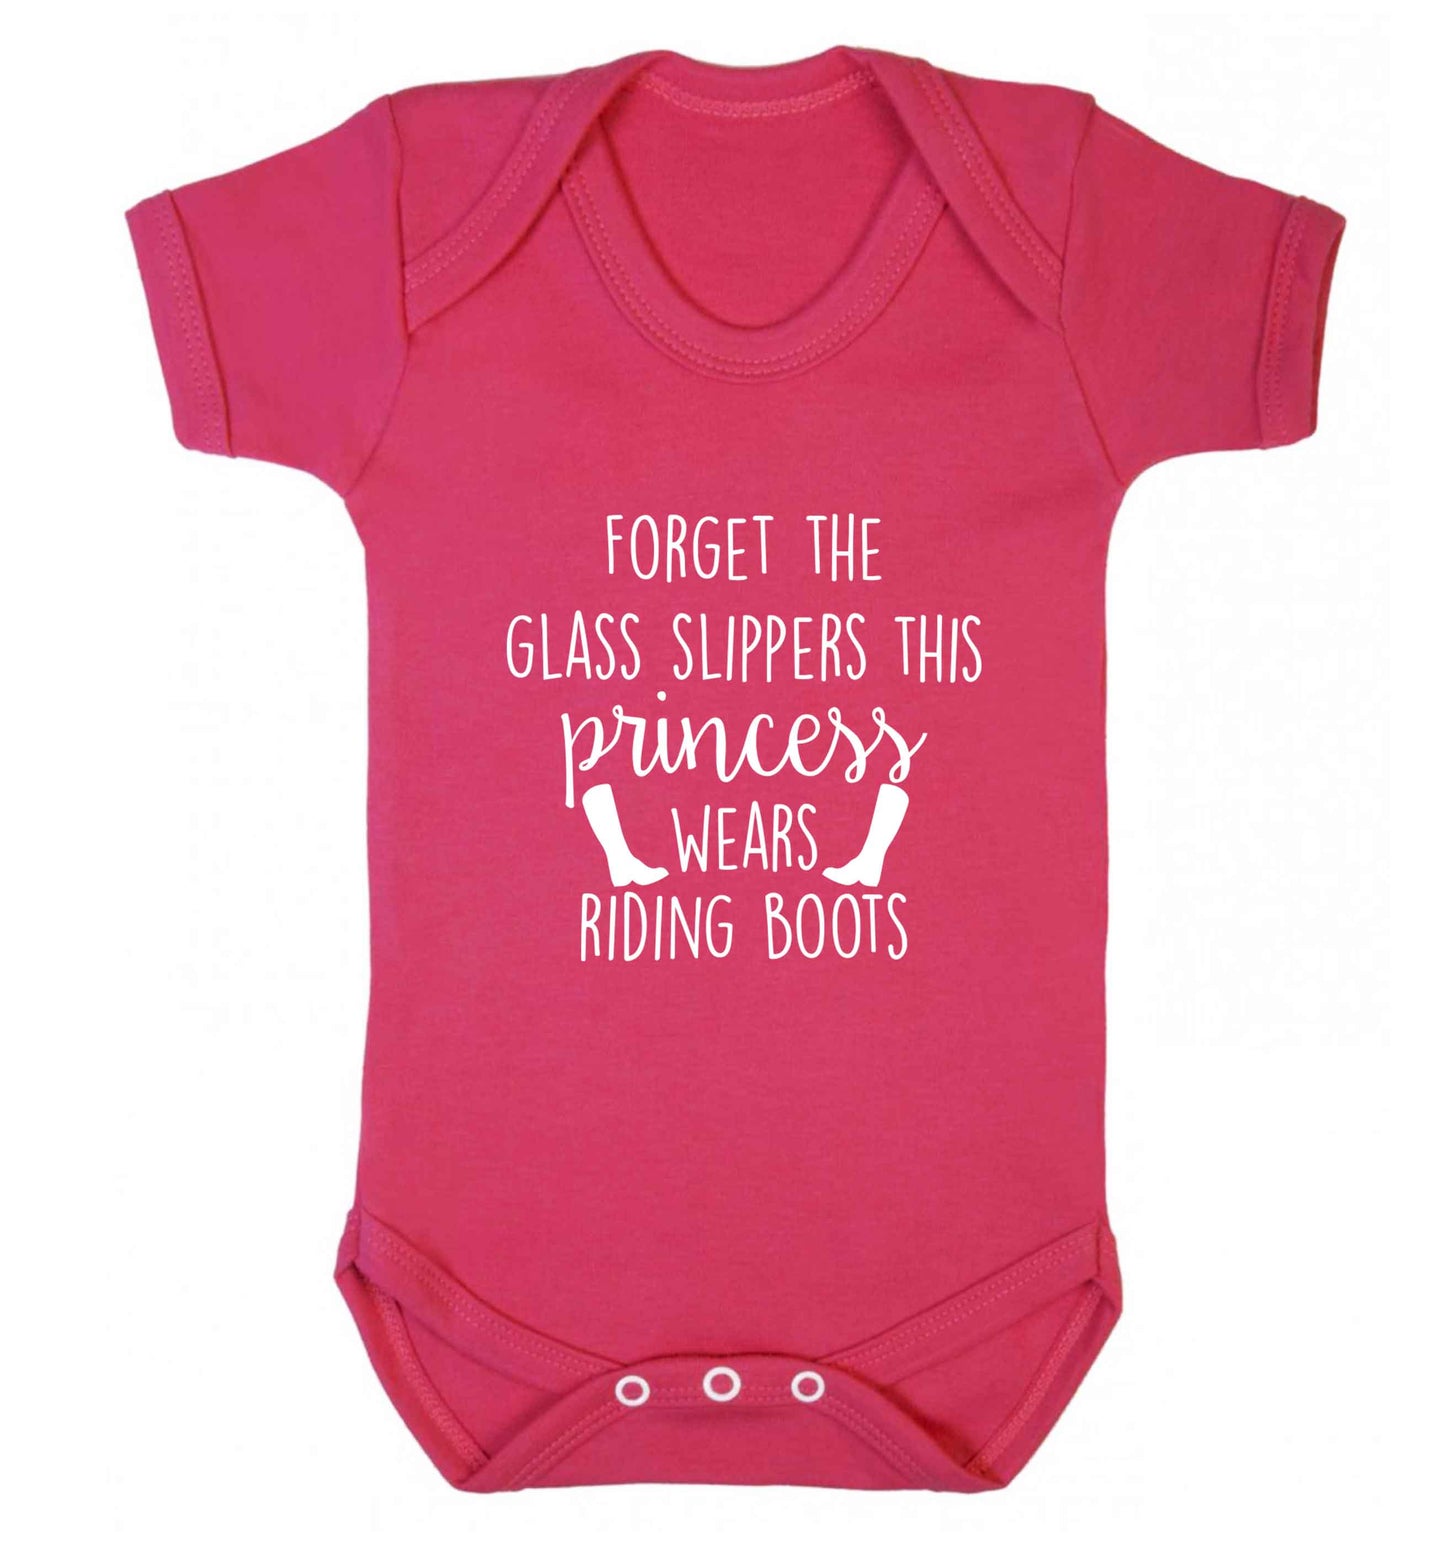 Forget the glass slippers this princess wears riding boots baby vest dark pink 18-24 months